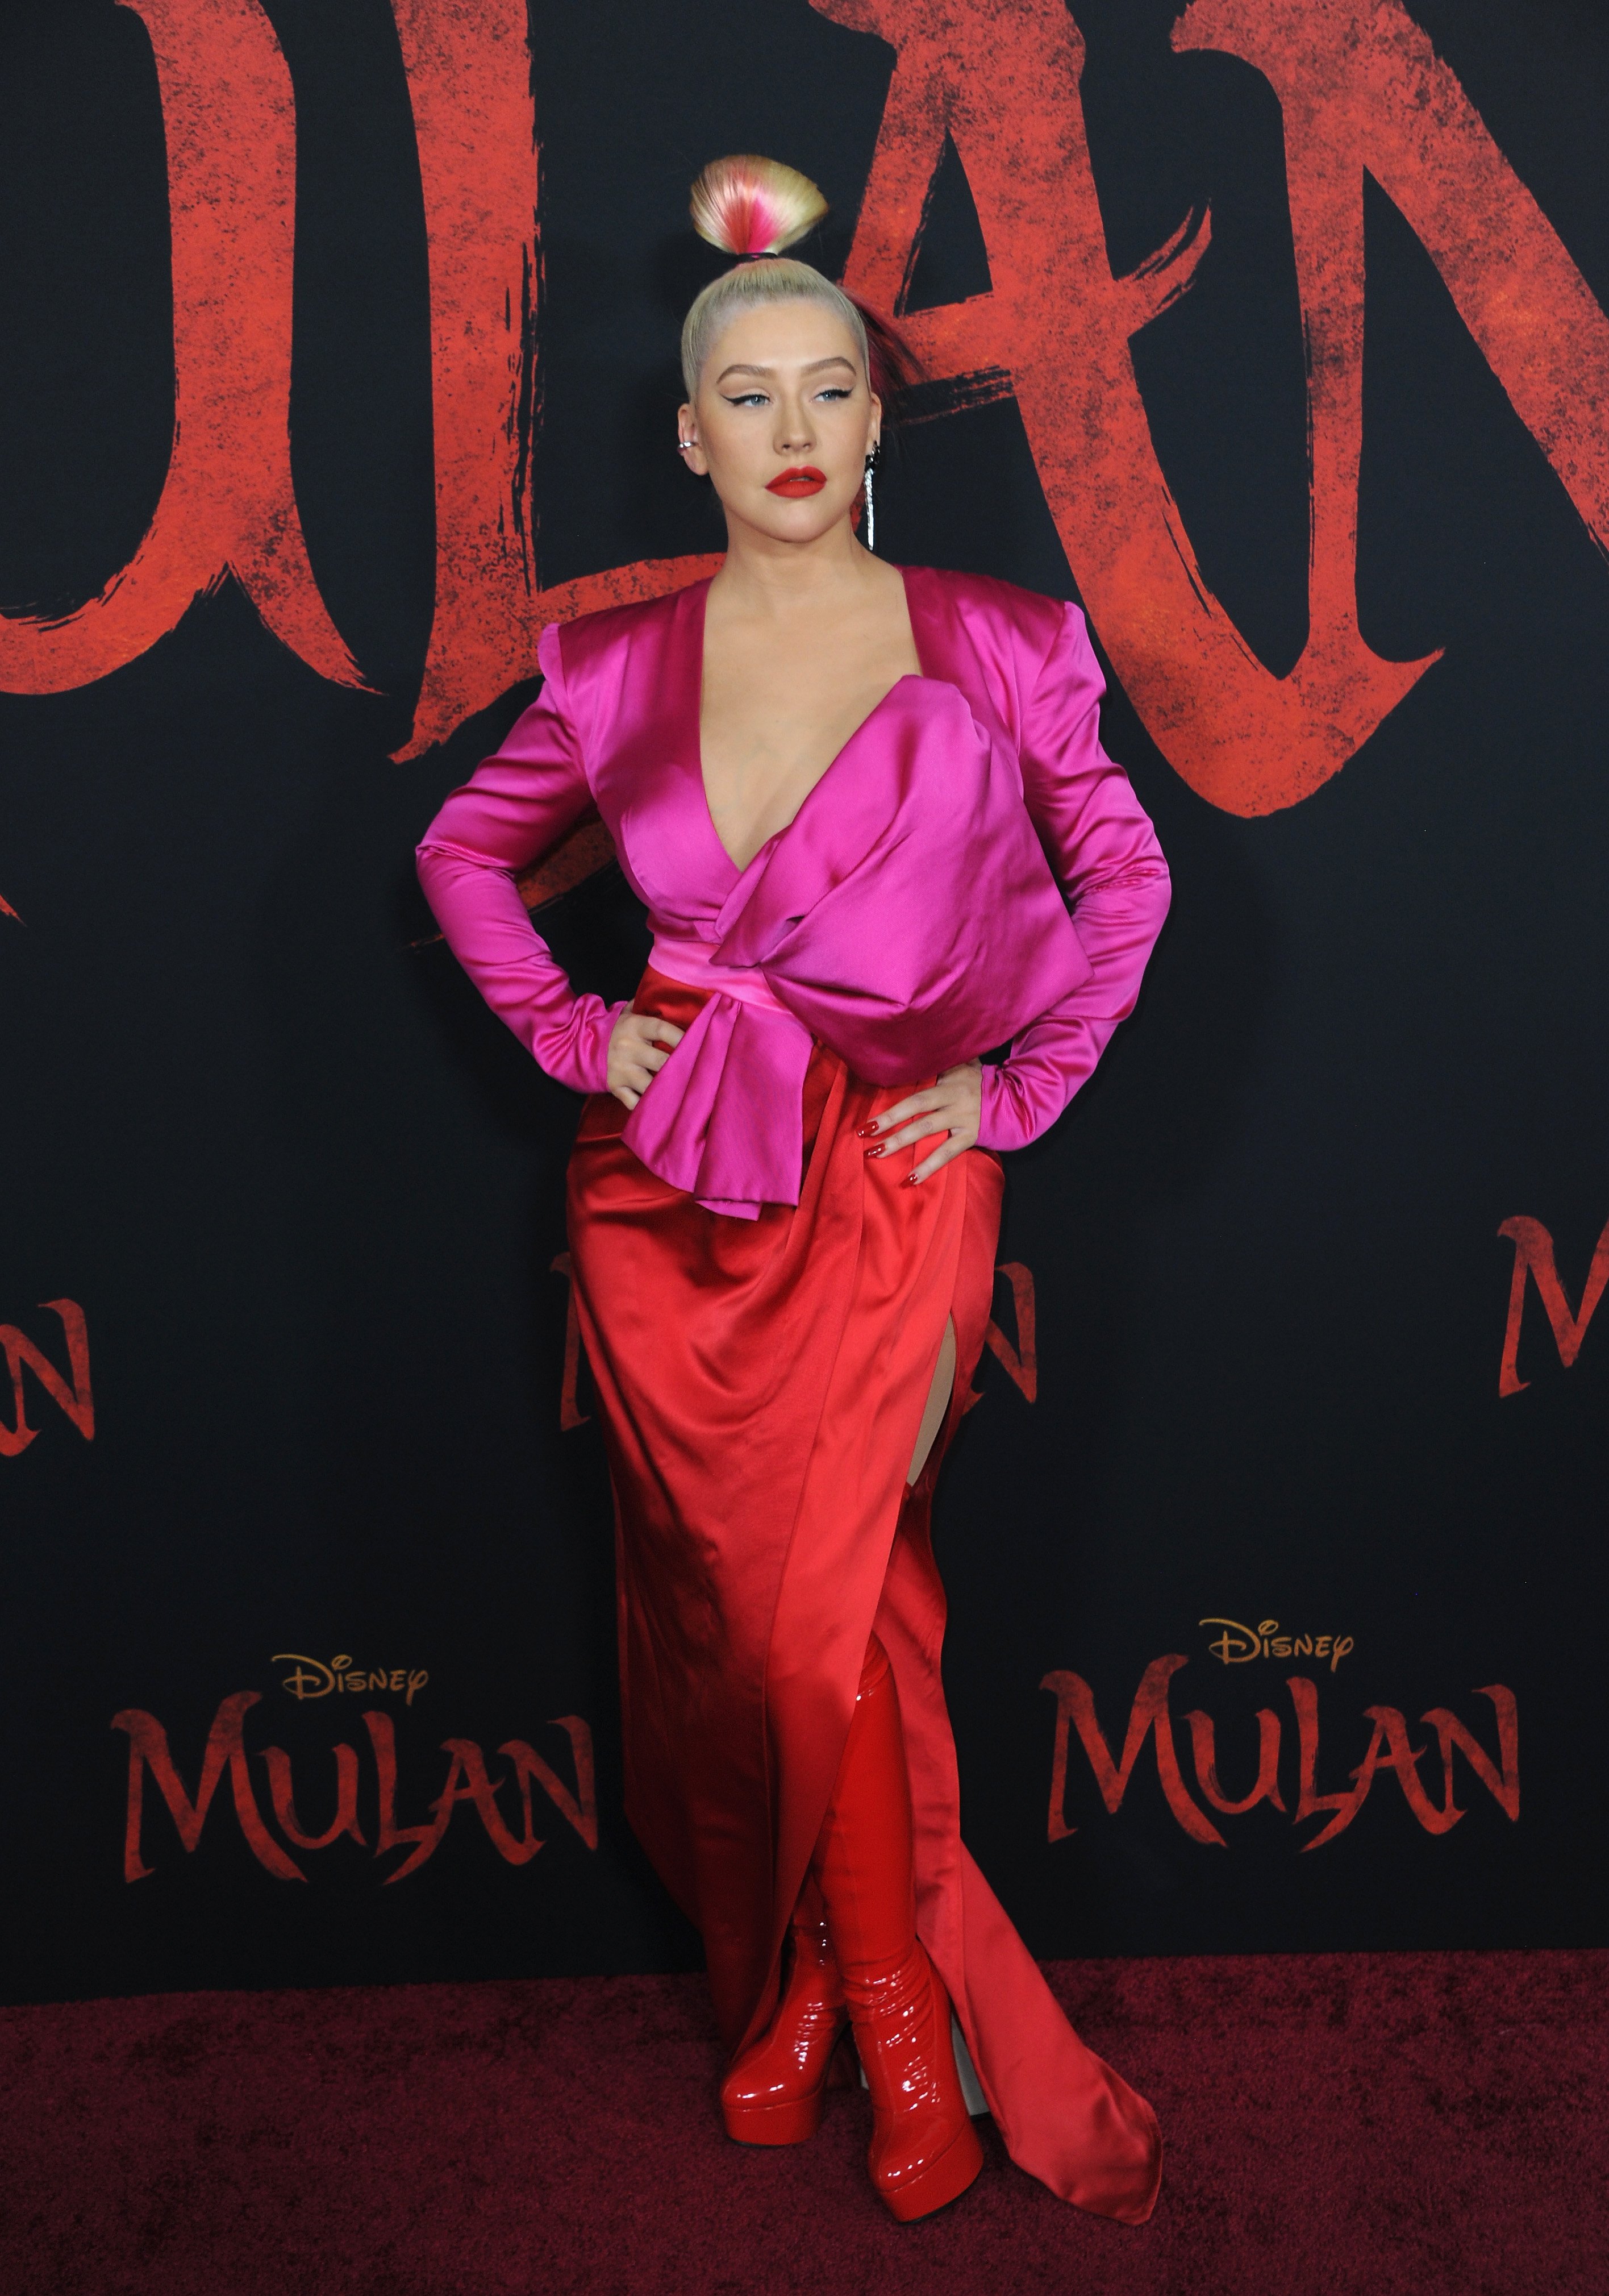 Christina Aguilera at the Premier of 'Mulan' in Hollywood, March, 2020. | Photo: Getty Images.